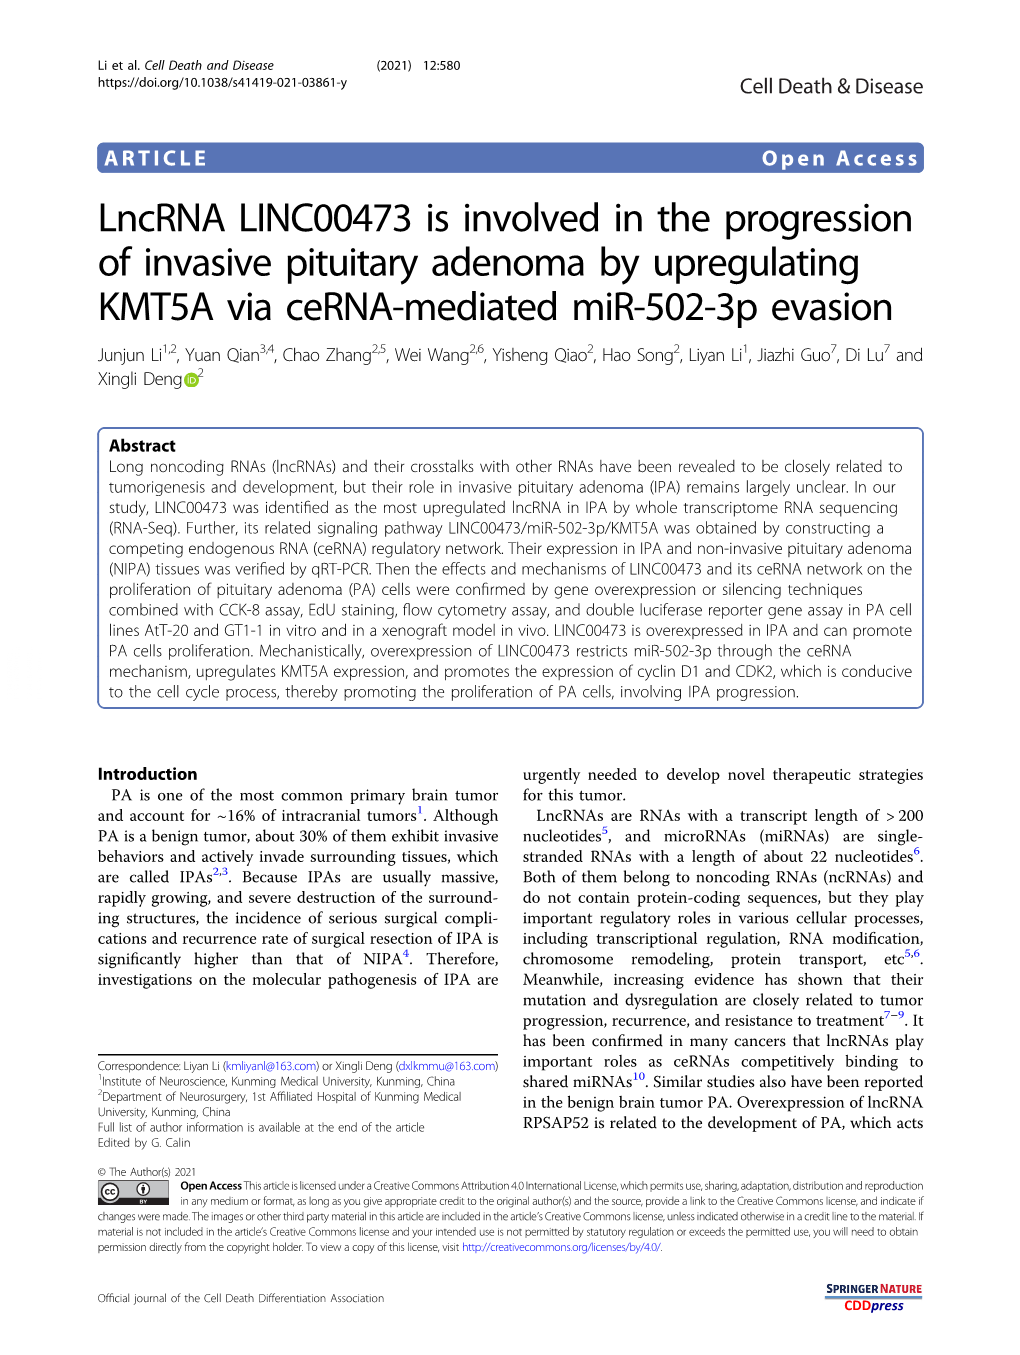 Lncrna LINC00473 Is Involved in the Progression of Invasive Pituitary